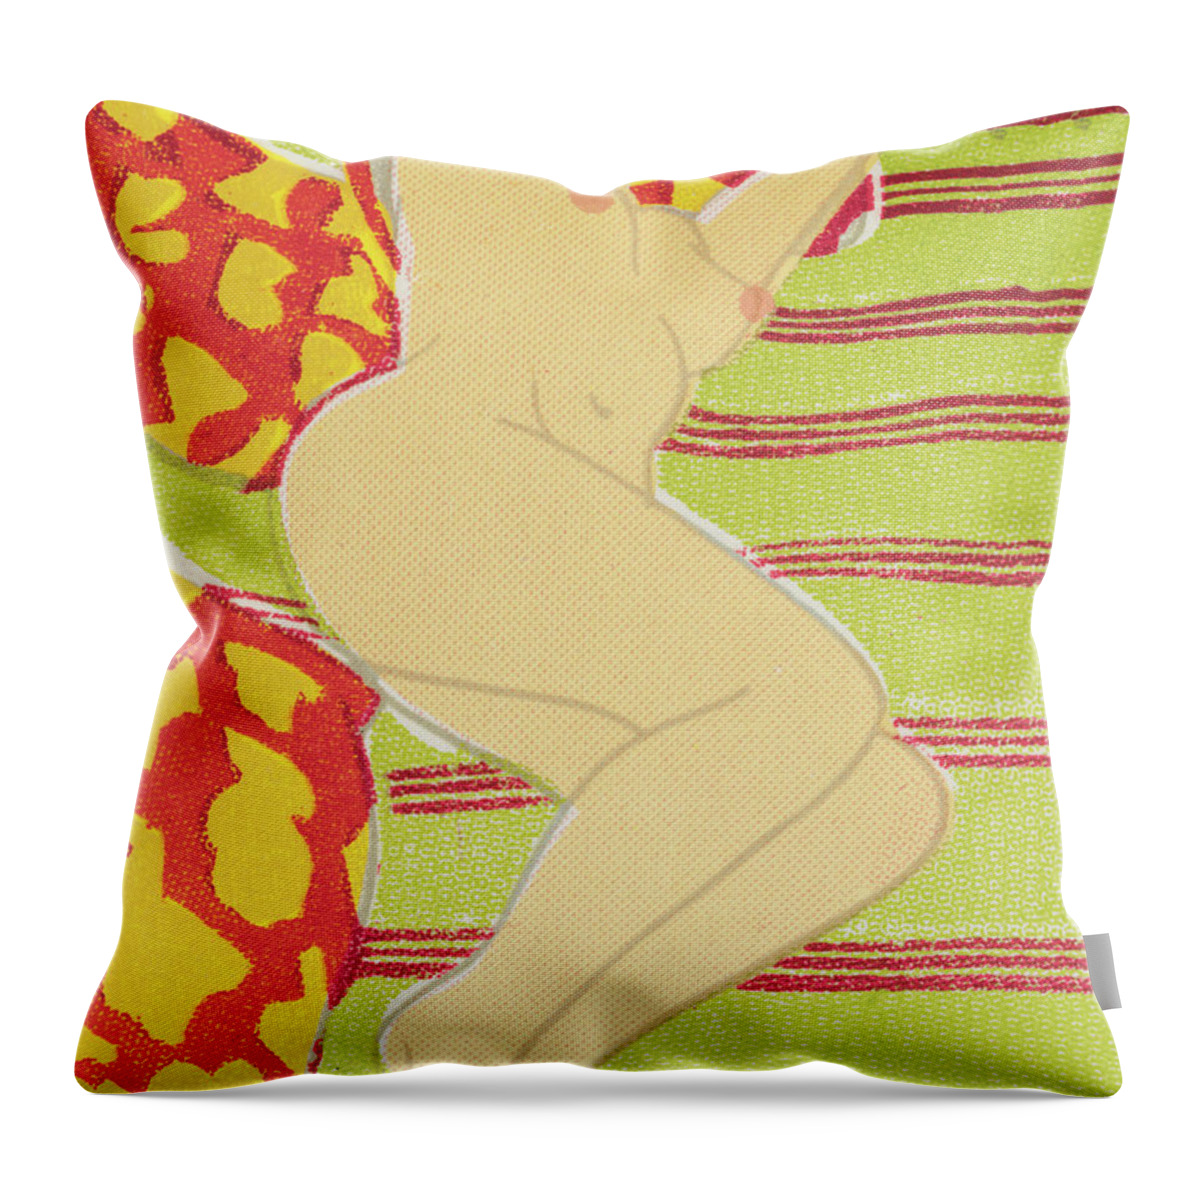 Adult Throw Pillow featuring the drawing Reclining Nude Woman by CSA Images